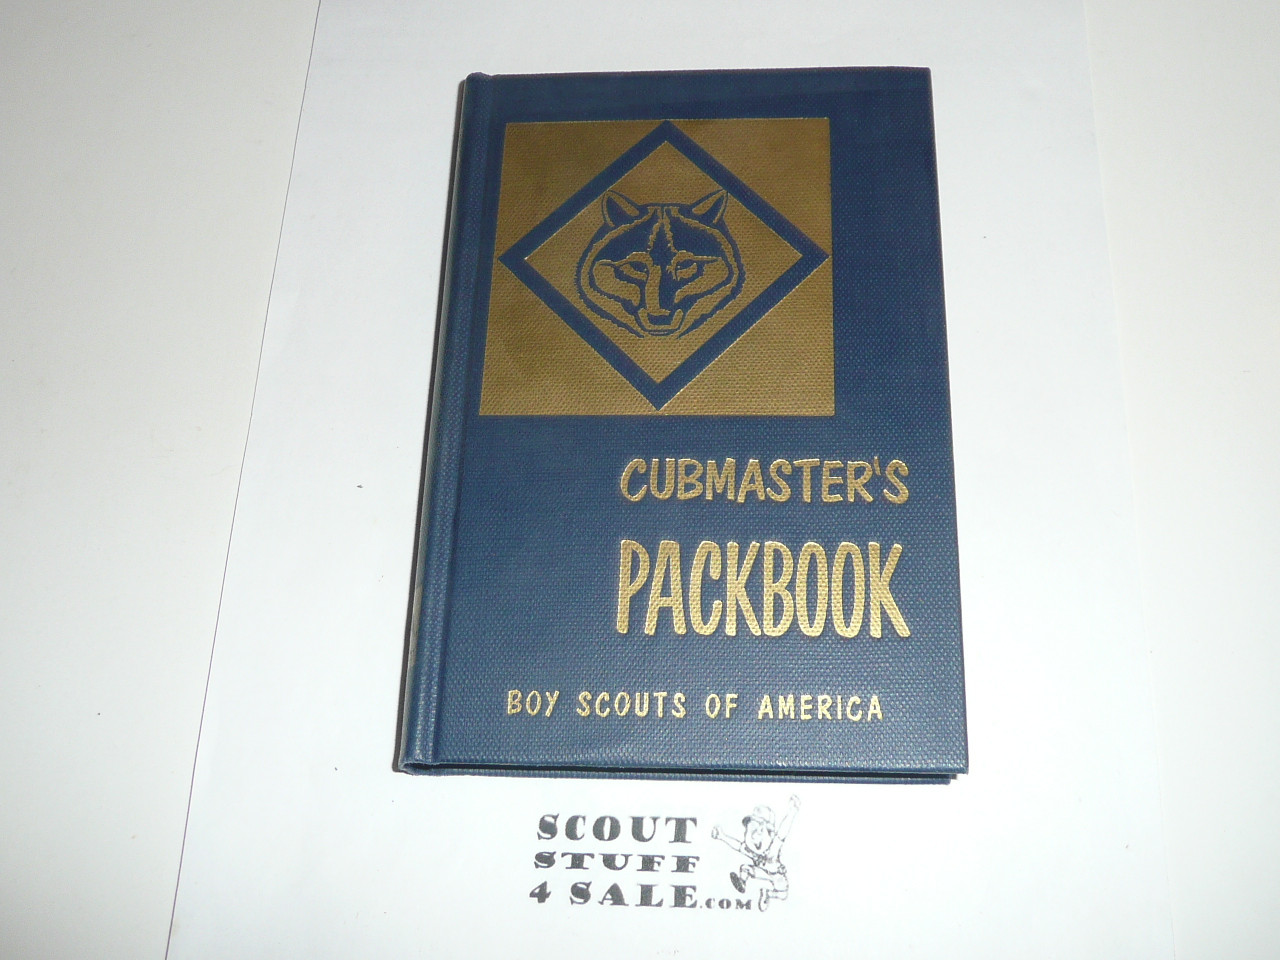 1965 Cubmaster's Packbook, Cub Scout, 4-65 Printing